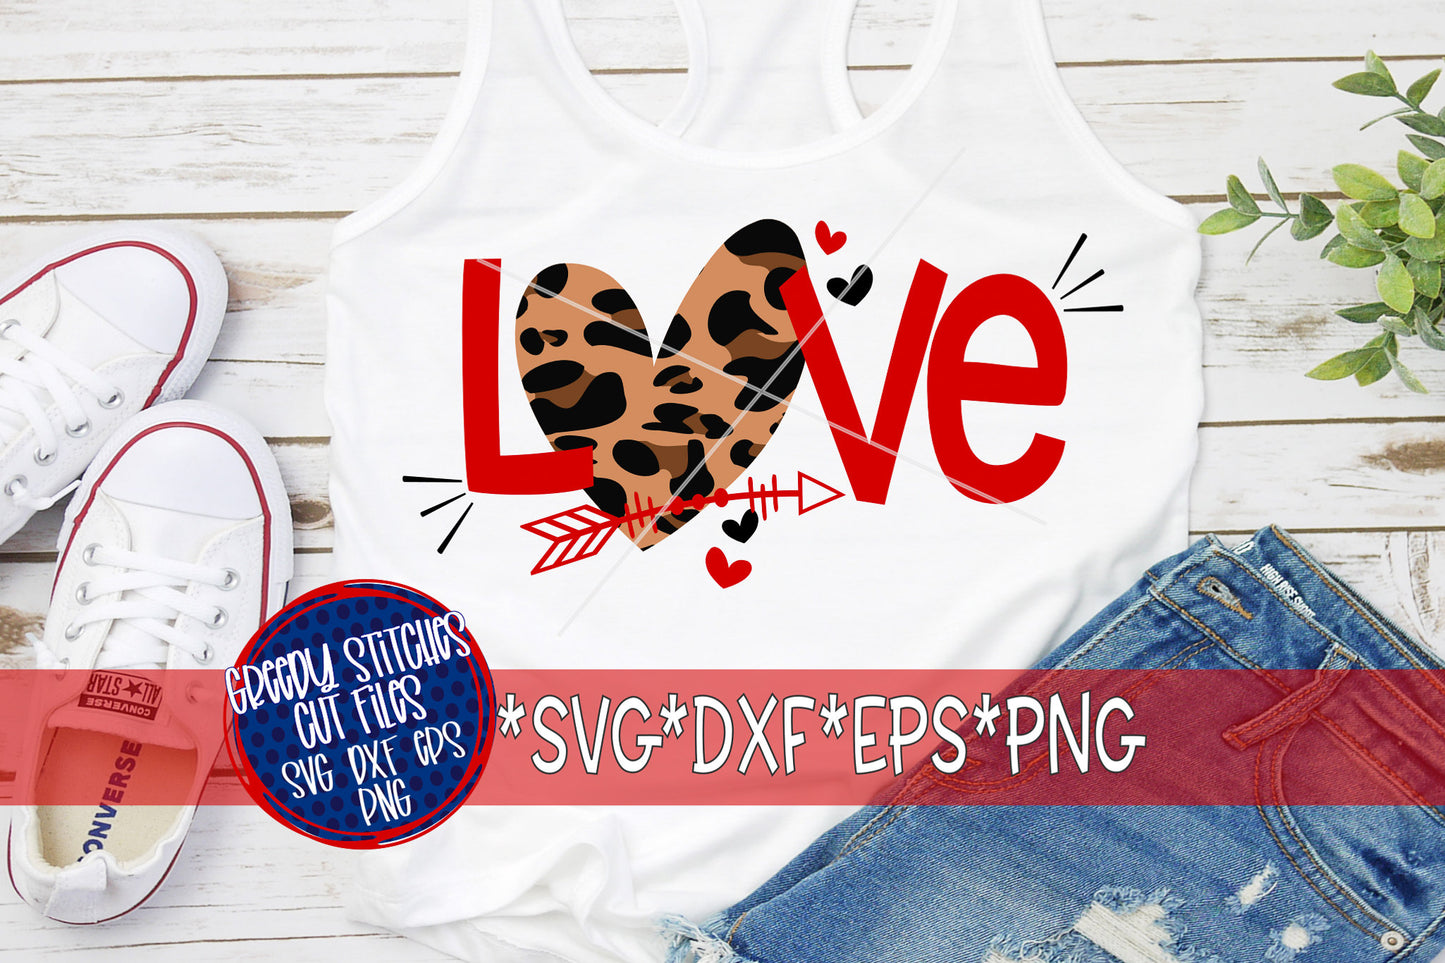 Love Leopard Print svg, dxf, eps, png. Heart | Love SvG | Leopard Print Svg | Heart SvG | Valentine&#39;s Day SvG | Instant Download Cut Files.